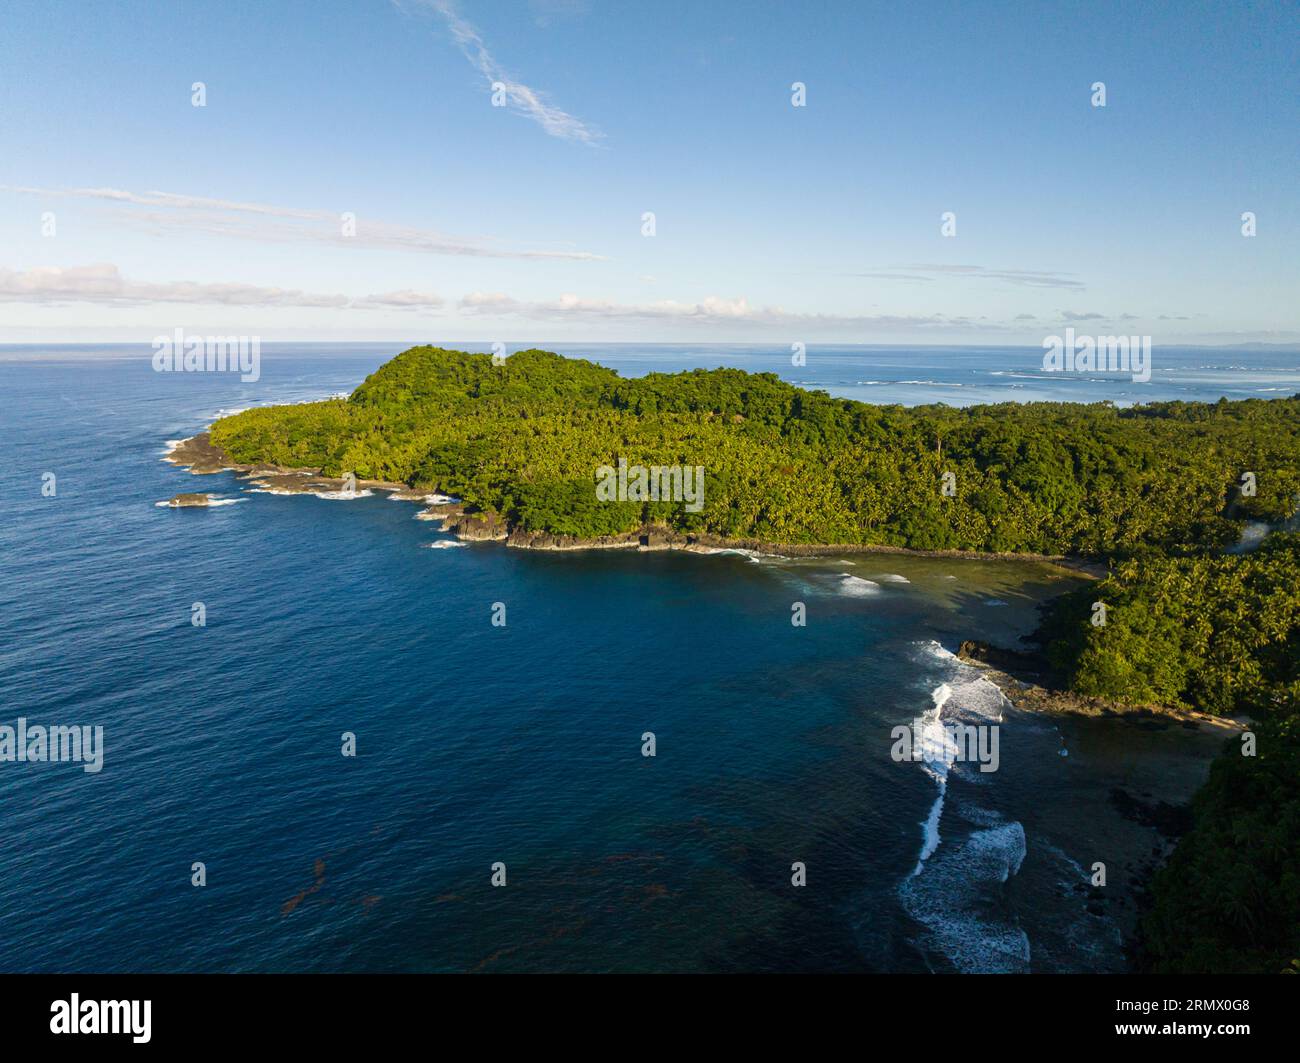 Rocky coastline of Tropical Island surrounded by deep blue sea with a great view of skyline. Surigao del Sur. Mindanao, Philippines. Stock Photo